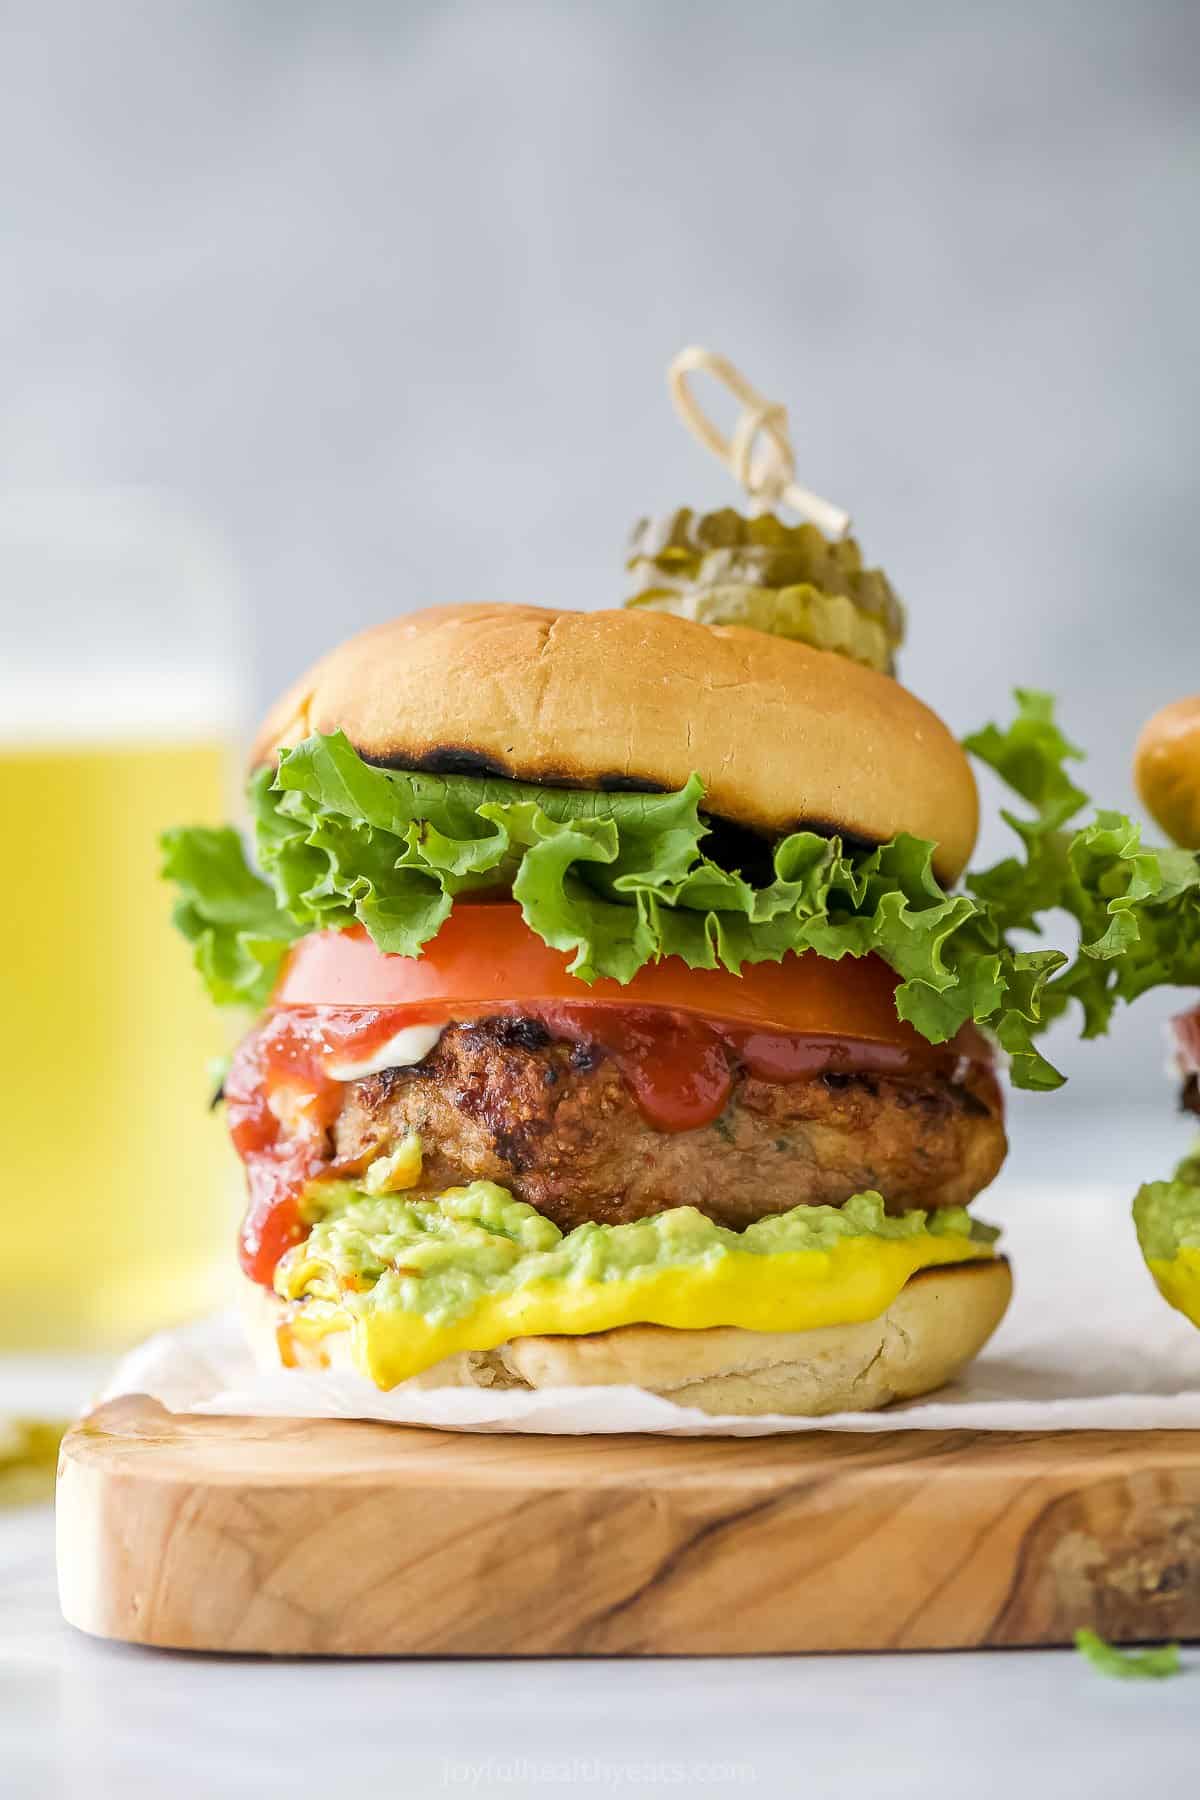 A homemade burger on a wooden cutting board with a glass of beer behind it